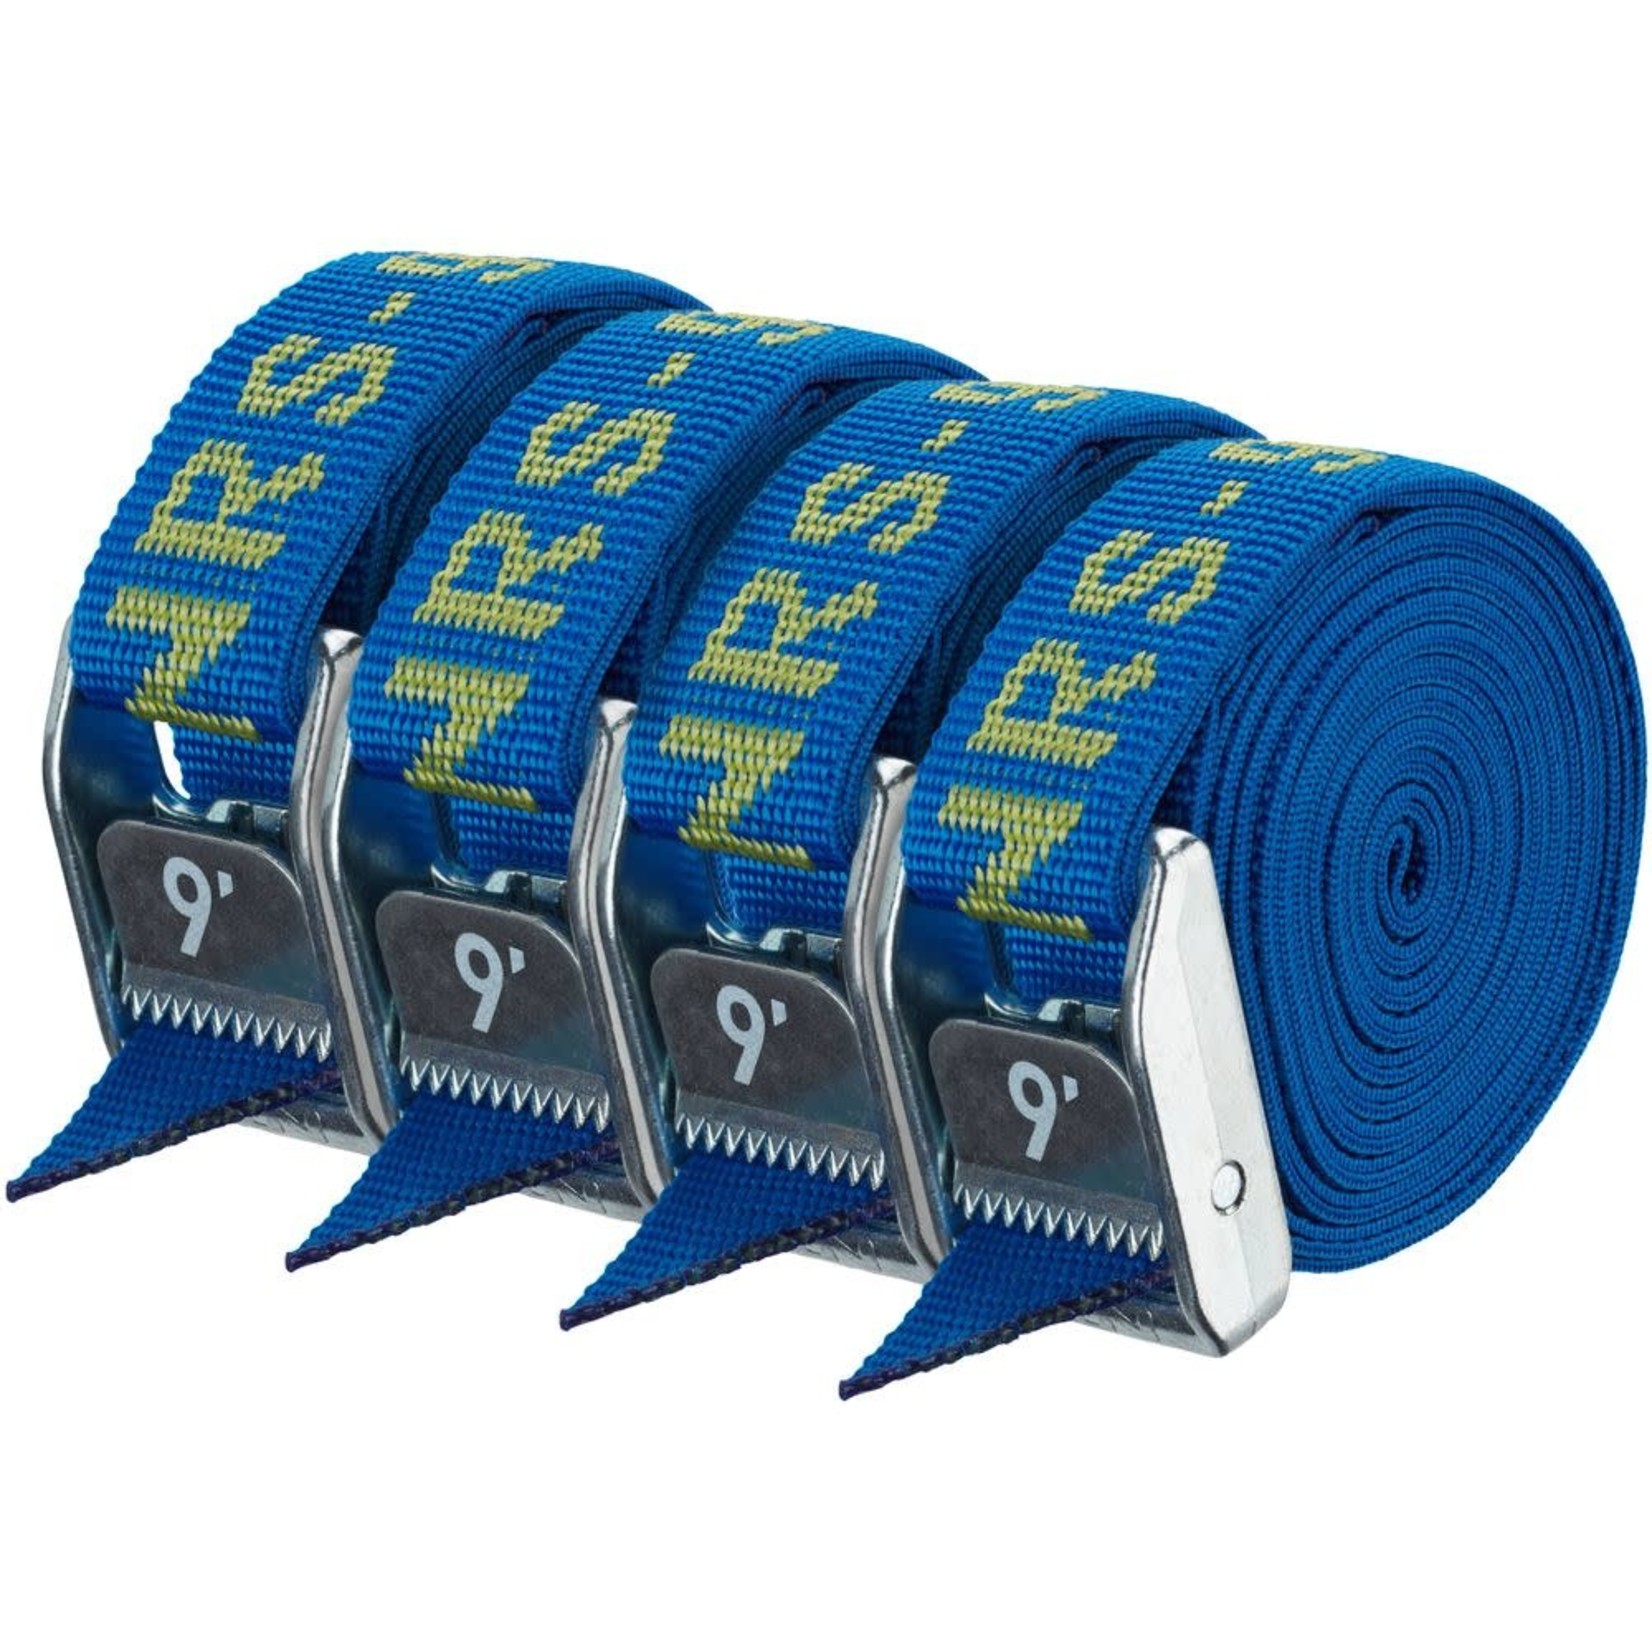 NRS NRS 1" HD Tie-Down Straps Iconic Blue 9' 4-pack